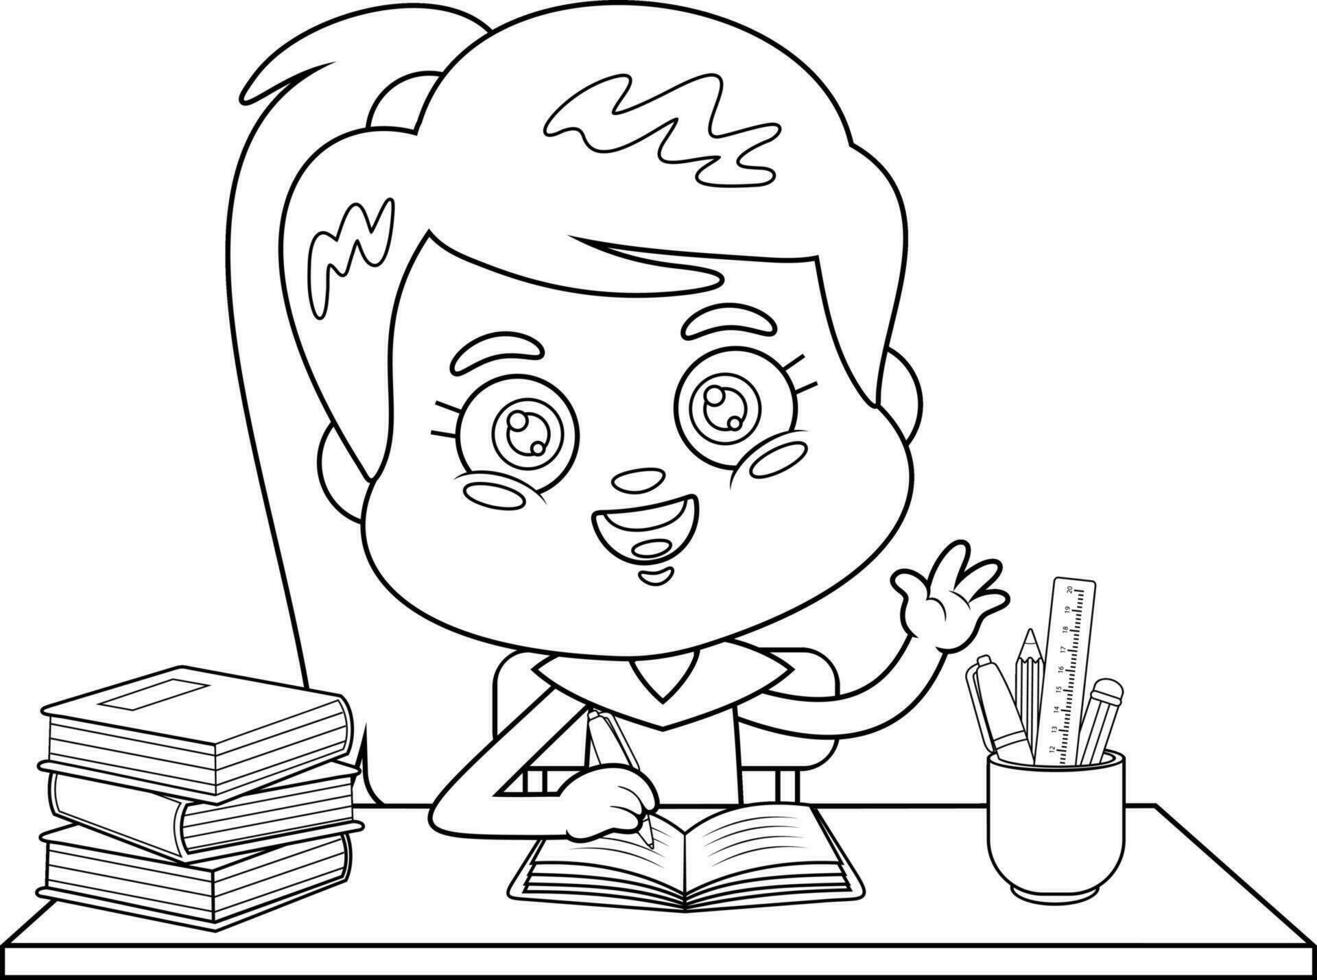 Outlined Cute School Girl Cartoon Character Raising Hand In Classroom Sitting At Desk. Vector Hand Drawn Illustration